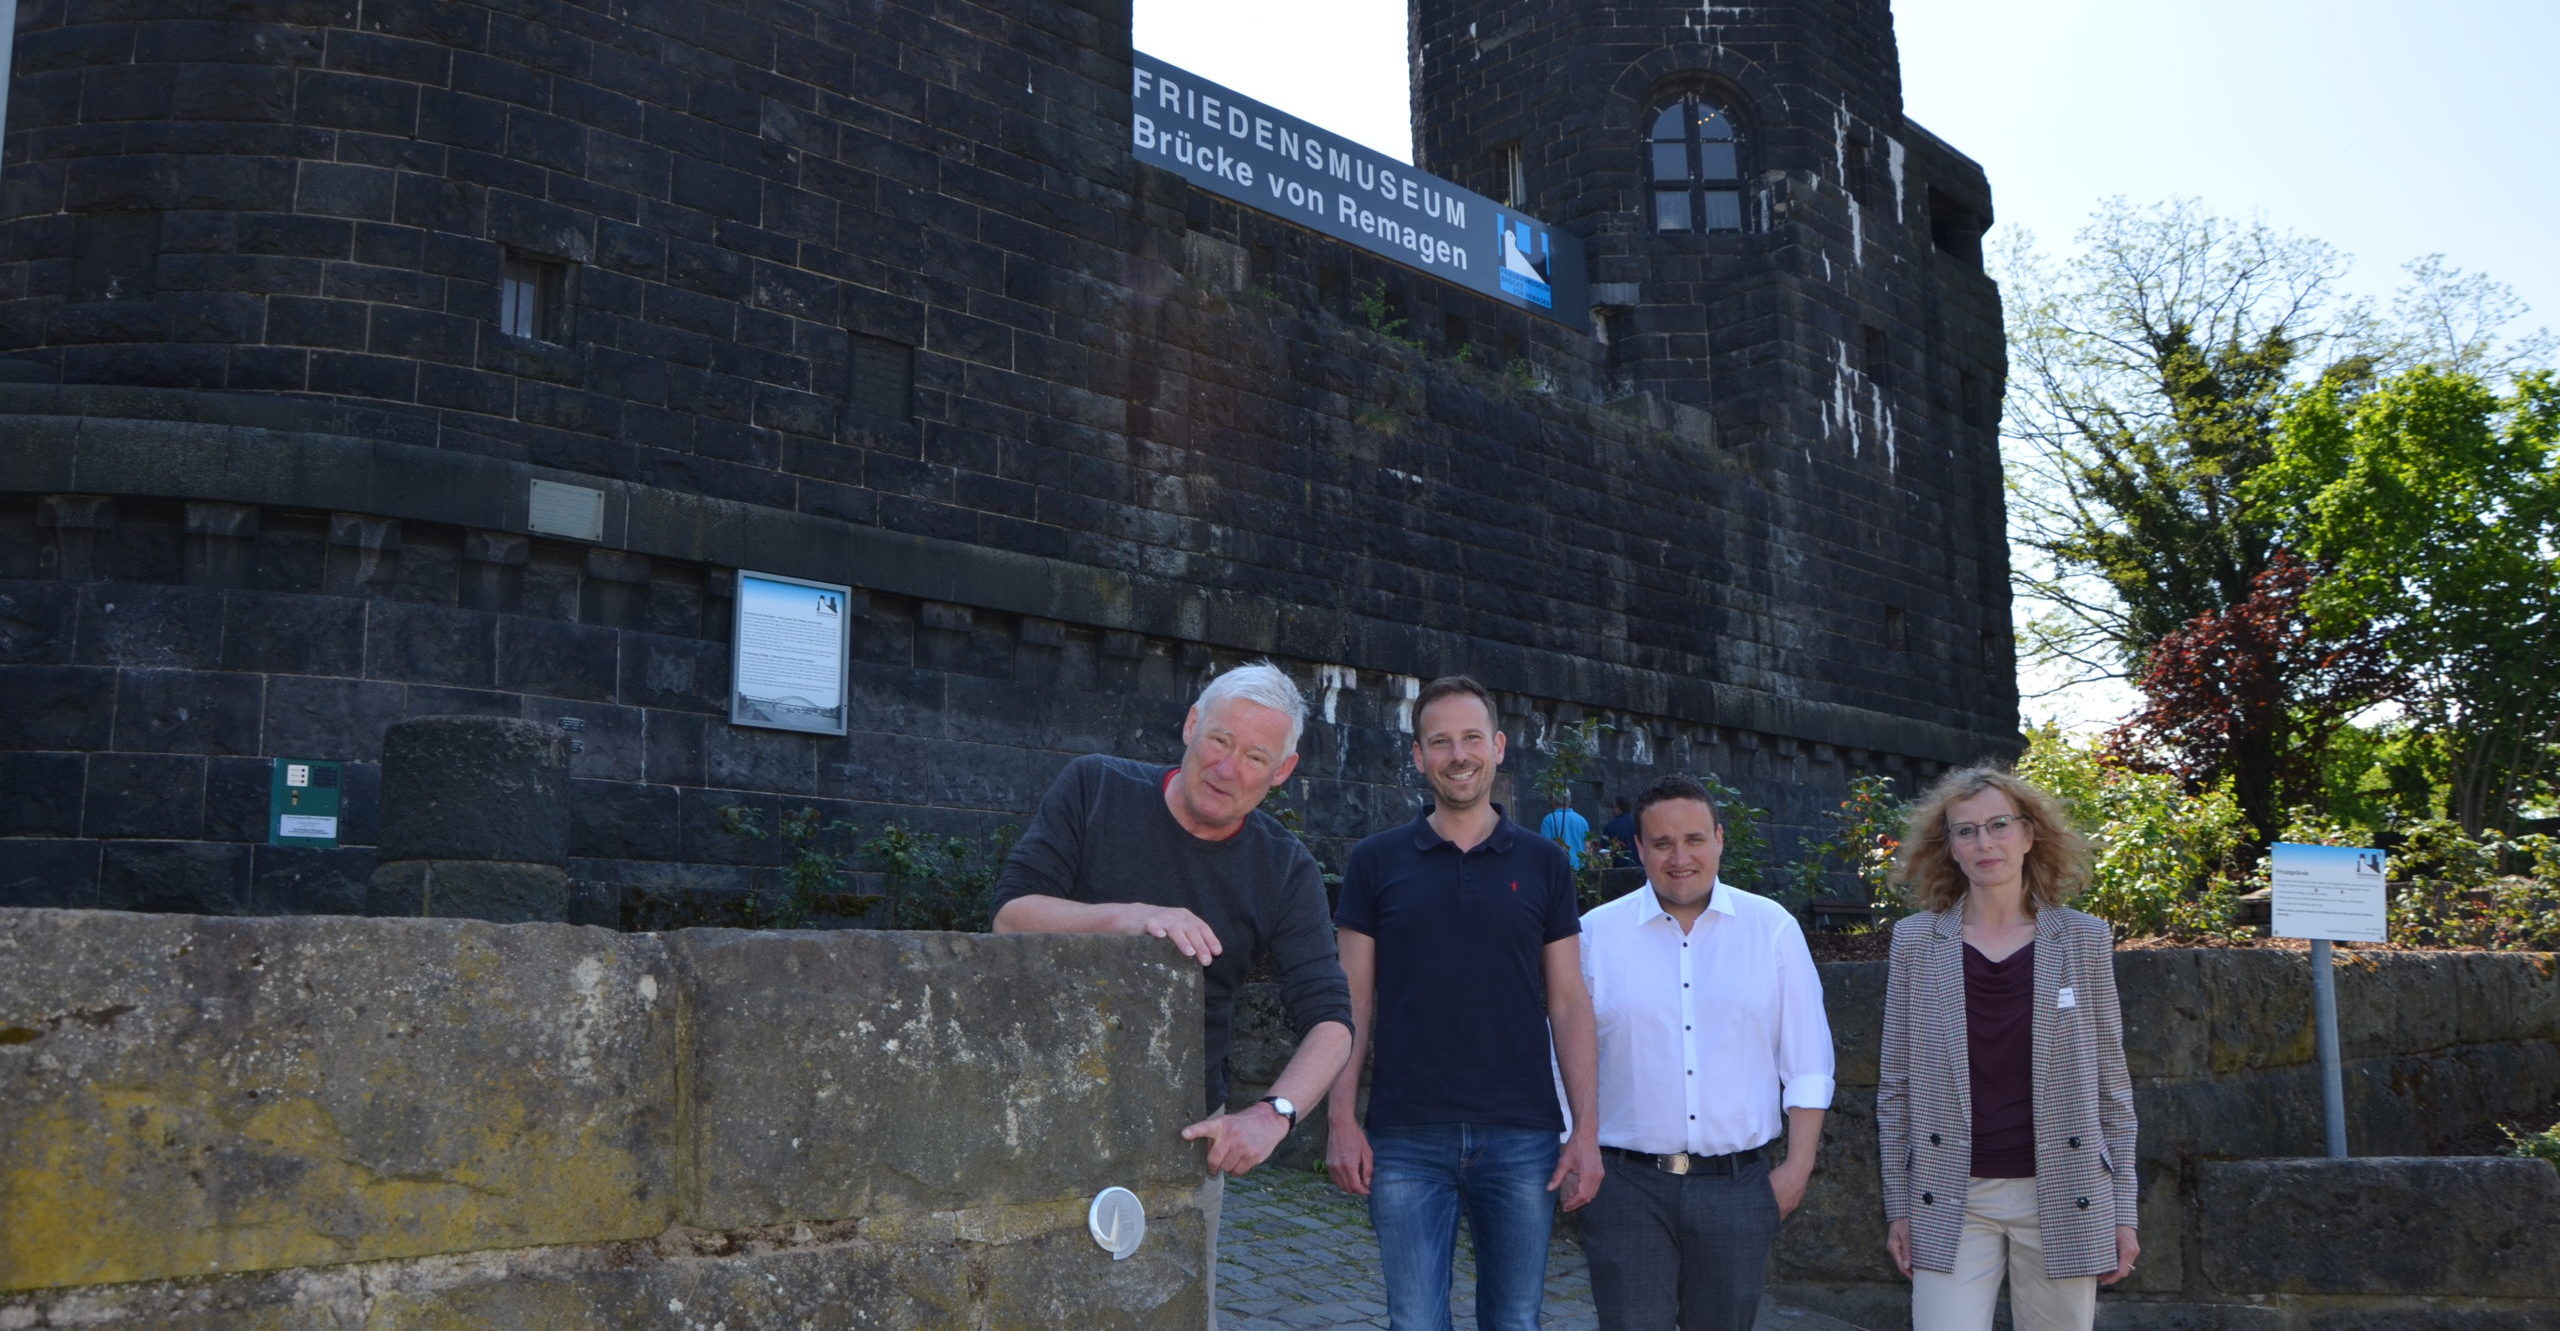 From left to right: Volker Thehos, Peace Museum Board Member,Björn Ingendahl, Mayor of Remagen, Chance Williams, Project Manager LRE Foundation, and Anke Sultan, Peace Museum Board Member